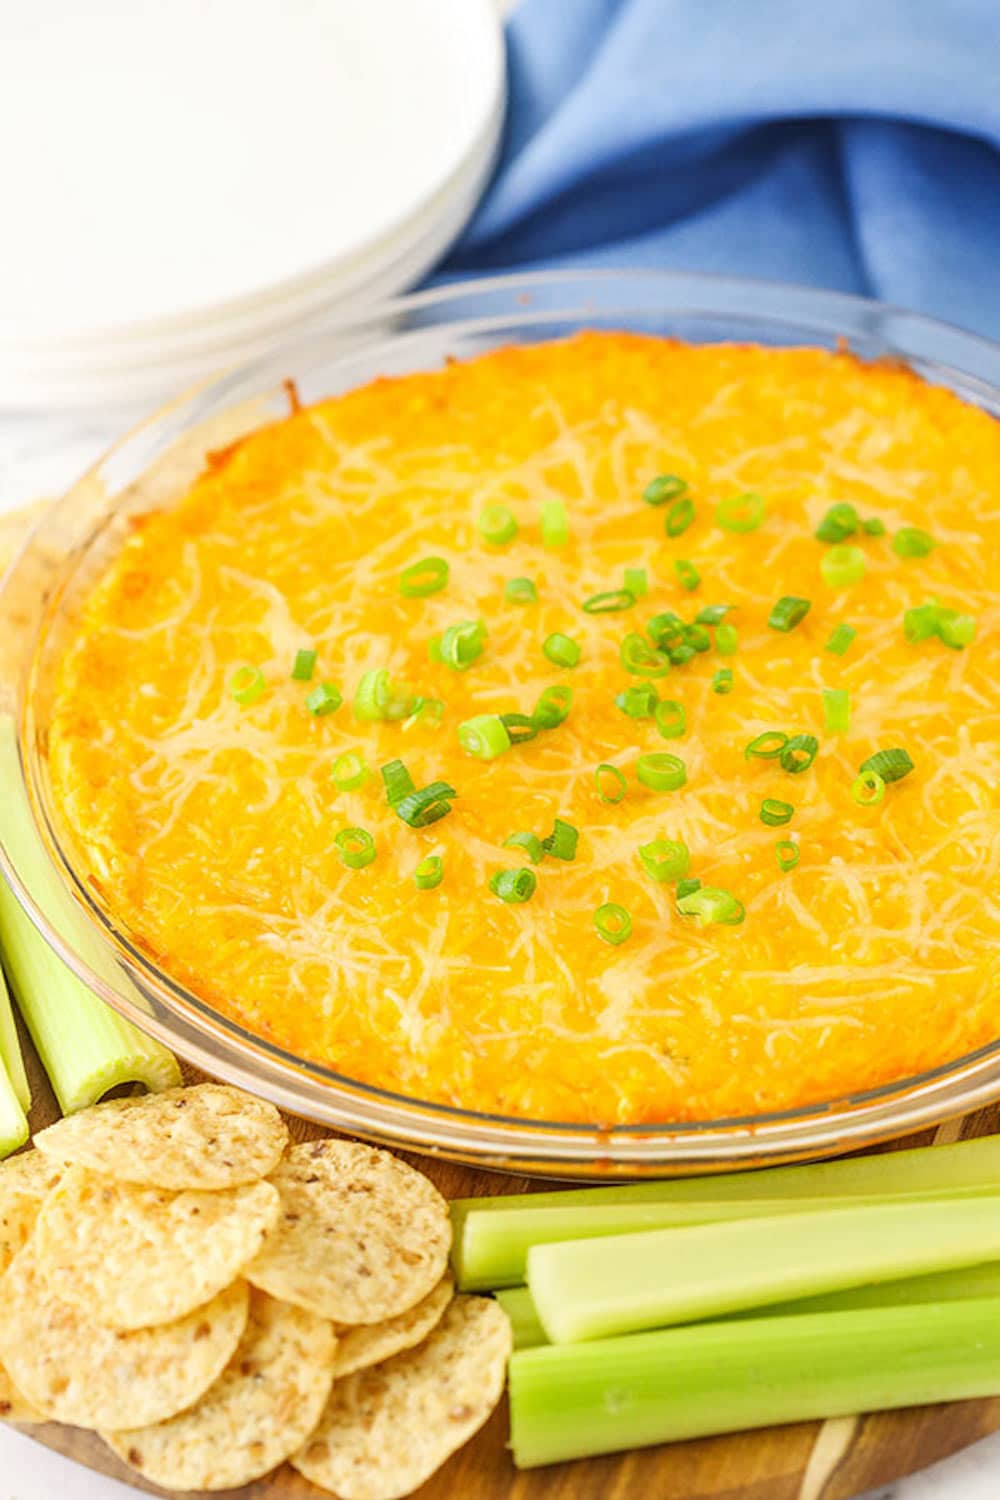 A Bowl of Buffalo Chicken Dip Beside a Pile of Crackers and a Stack of Celery